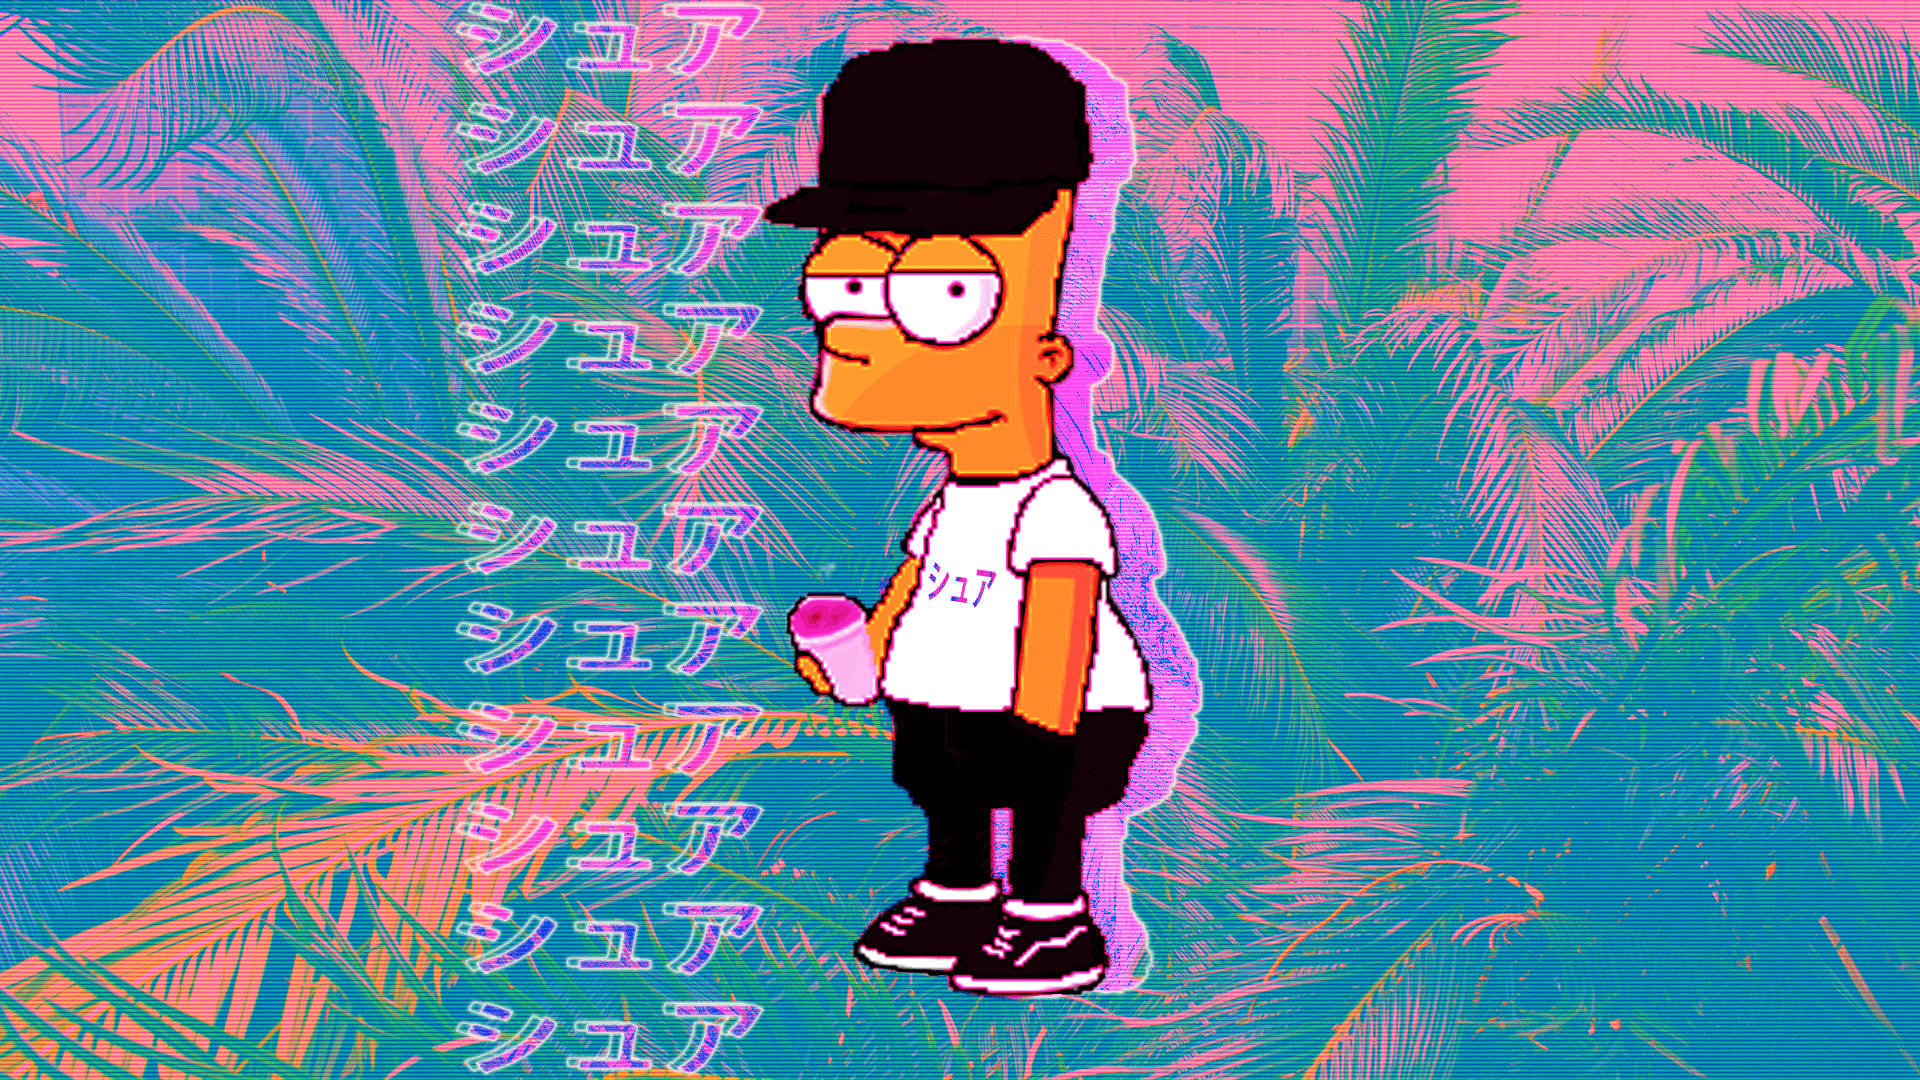 Cool Simpsons Glitch Background